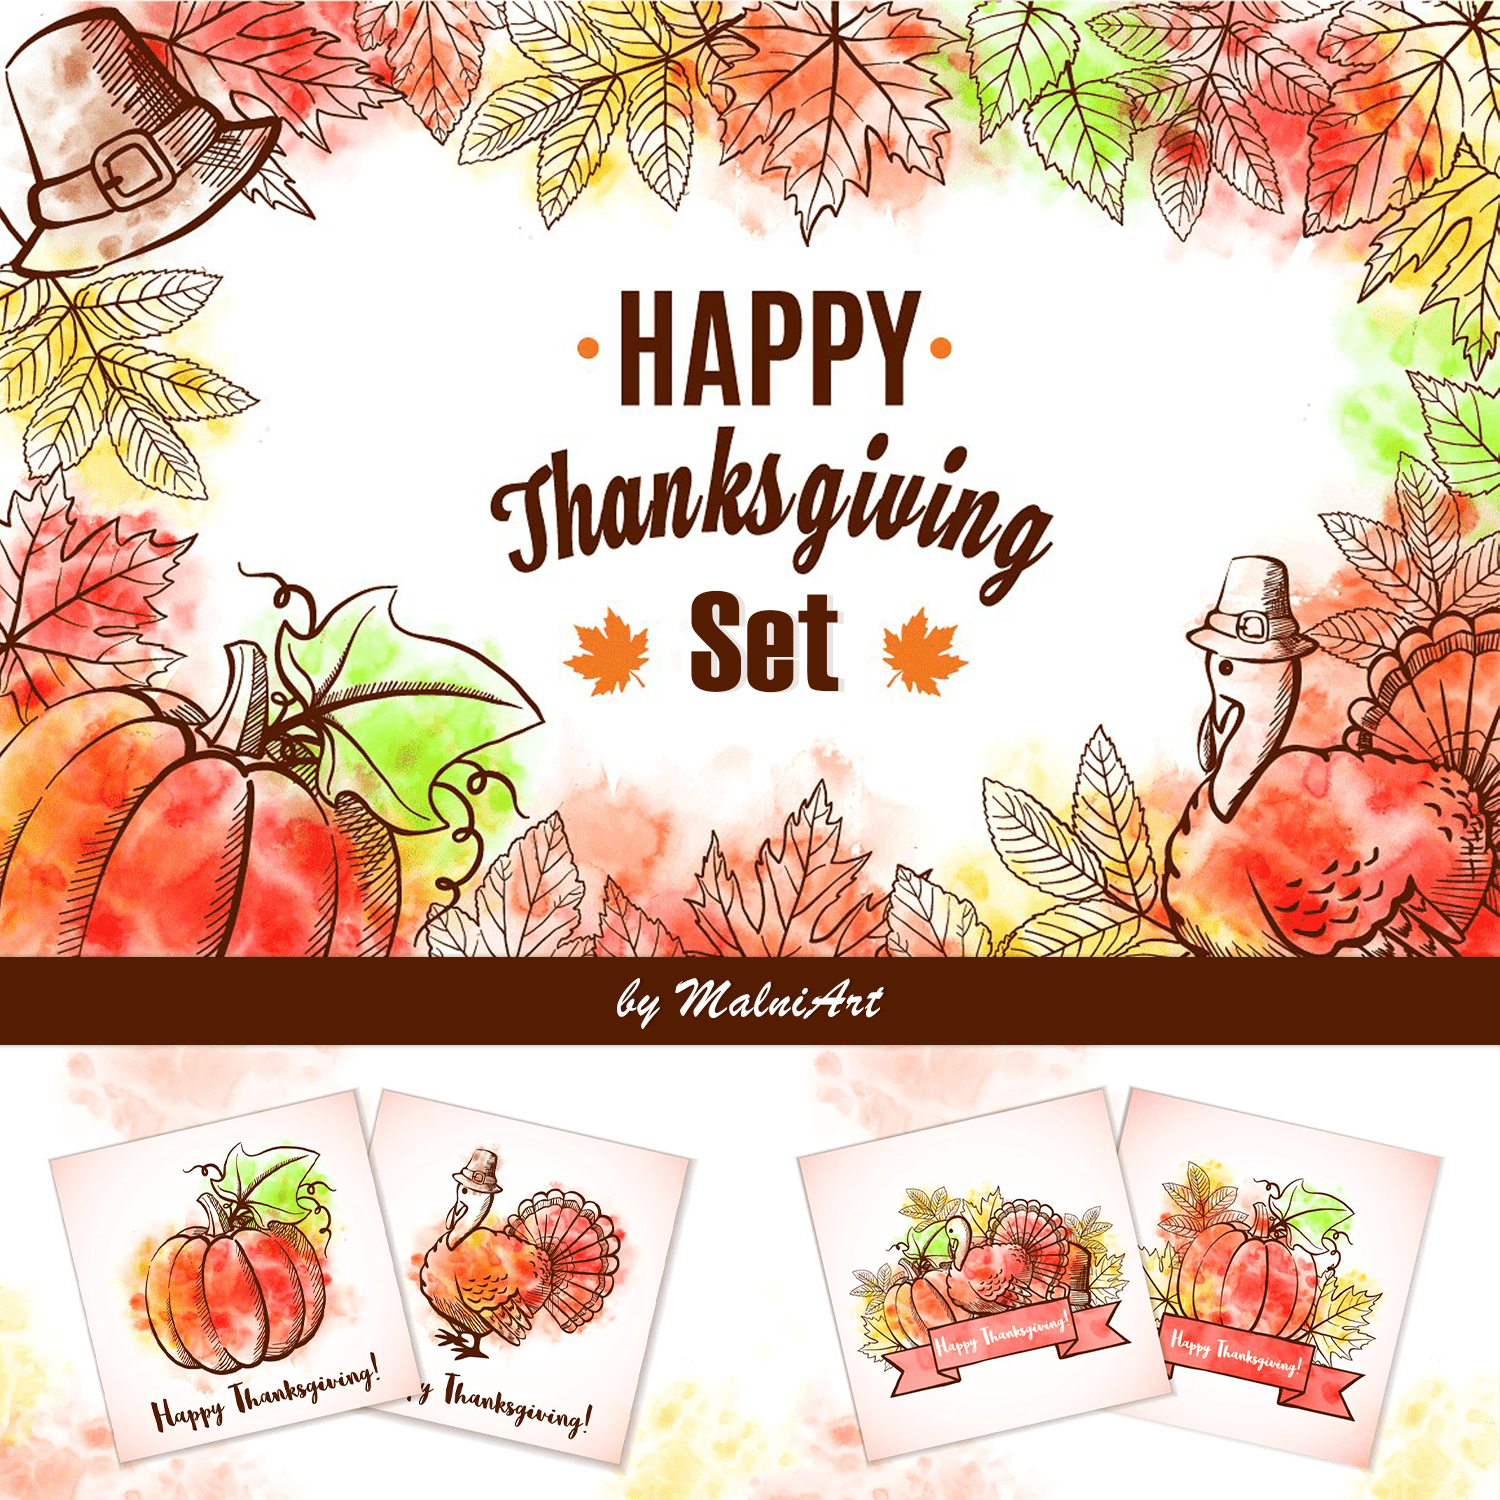 Happy Thanksgiving Set cover.